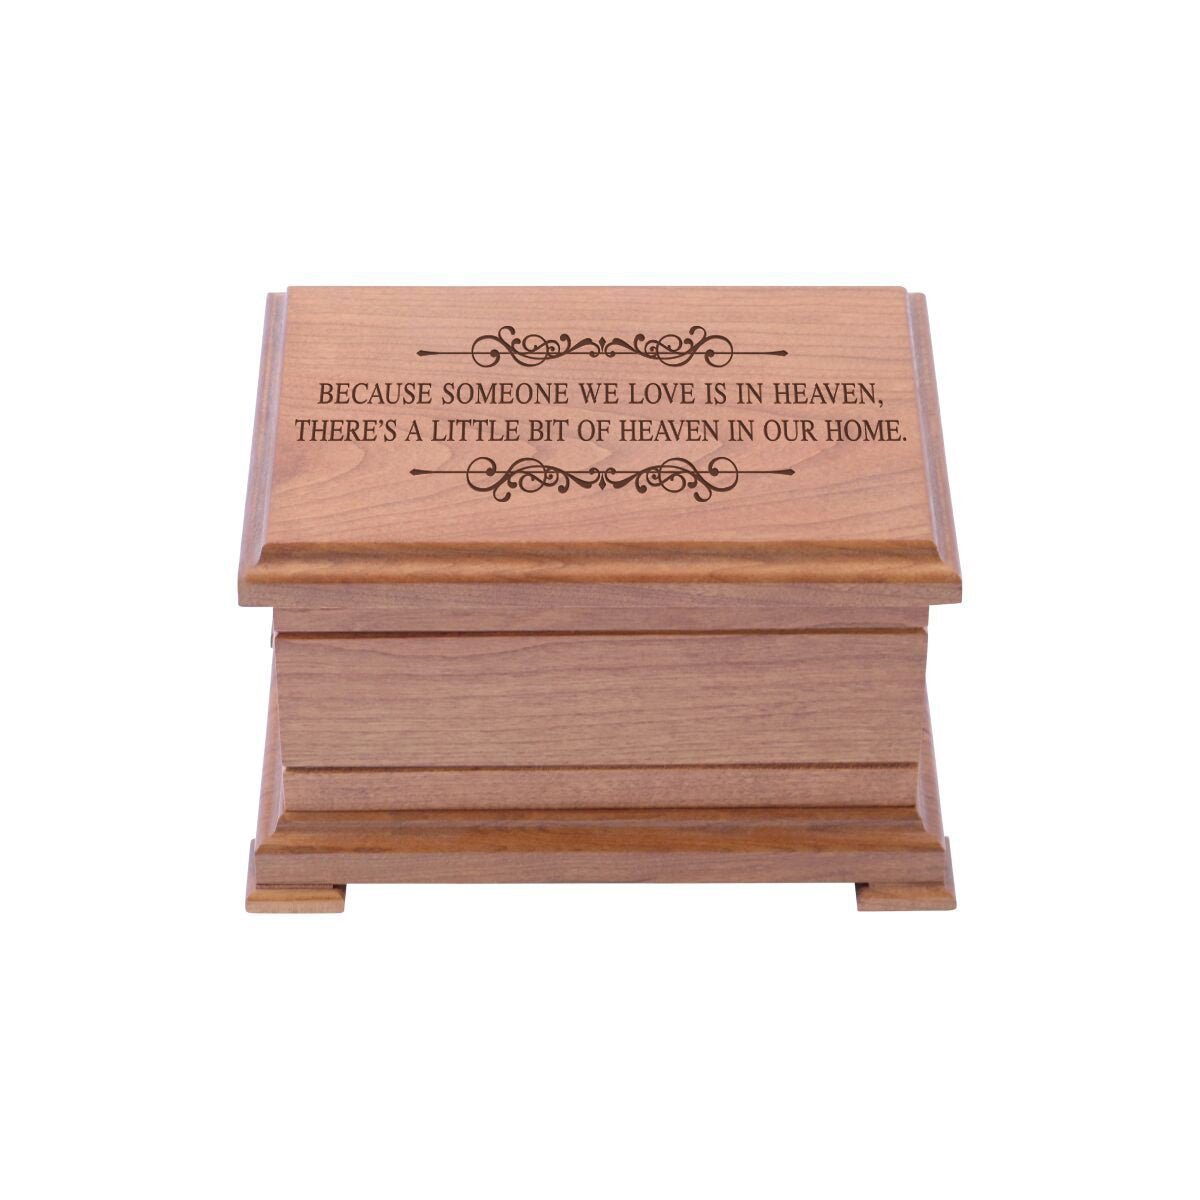 Engraved Wooden Urn Box for Human Ashes 9.75" x 7.75" x 4.25" holds 210 cu in Someone We Love - LifeSong Milestones